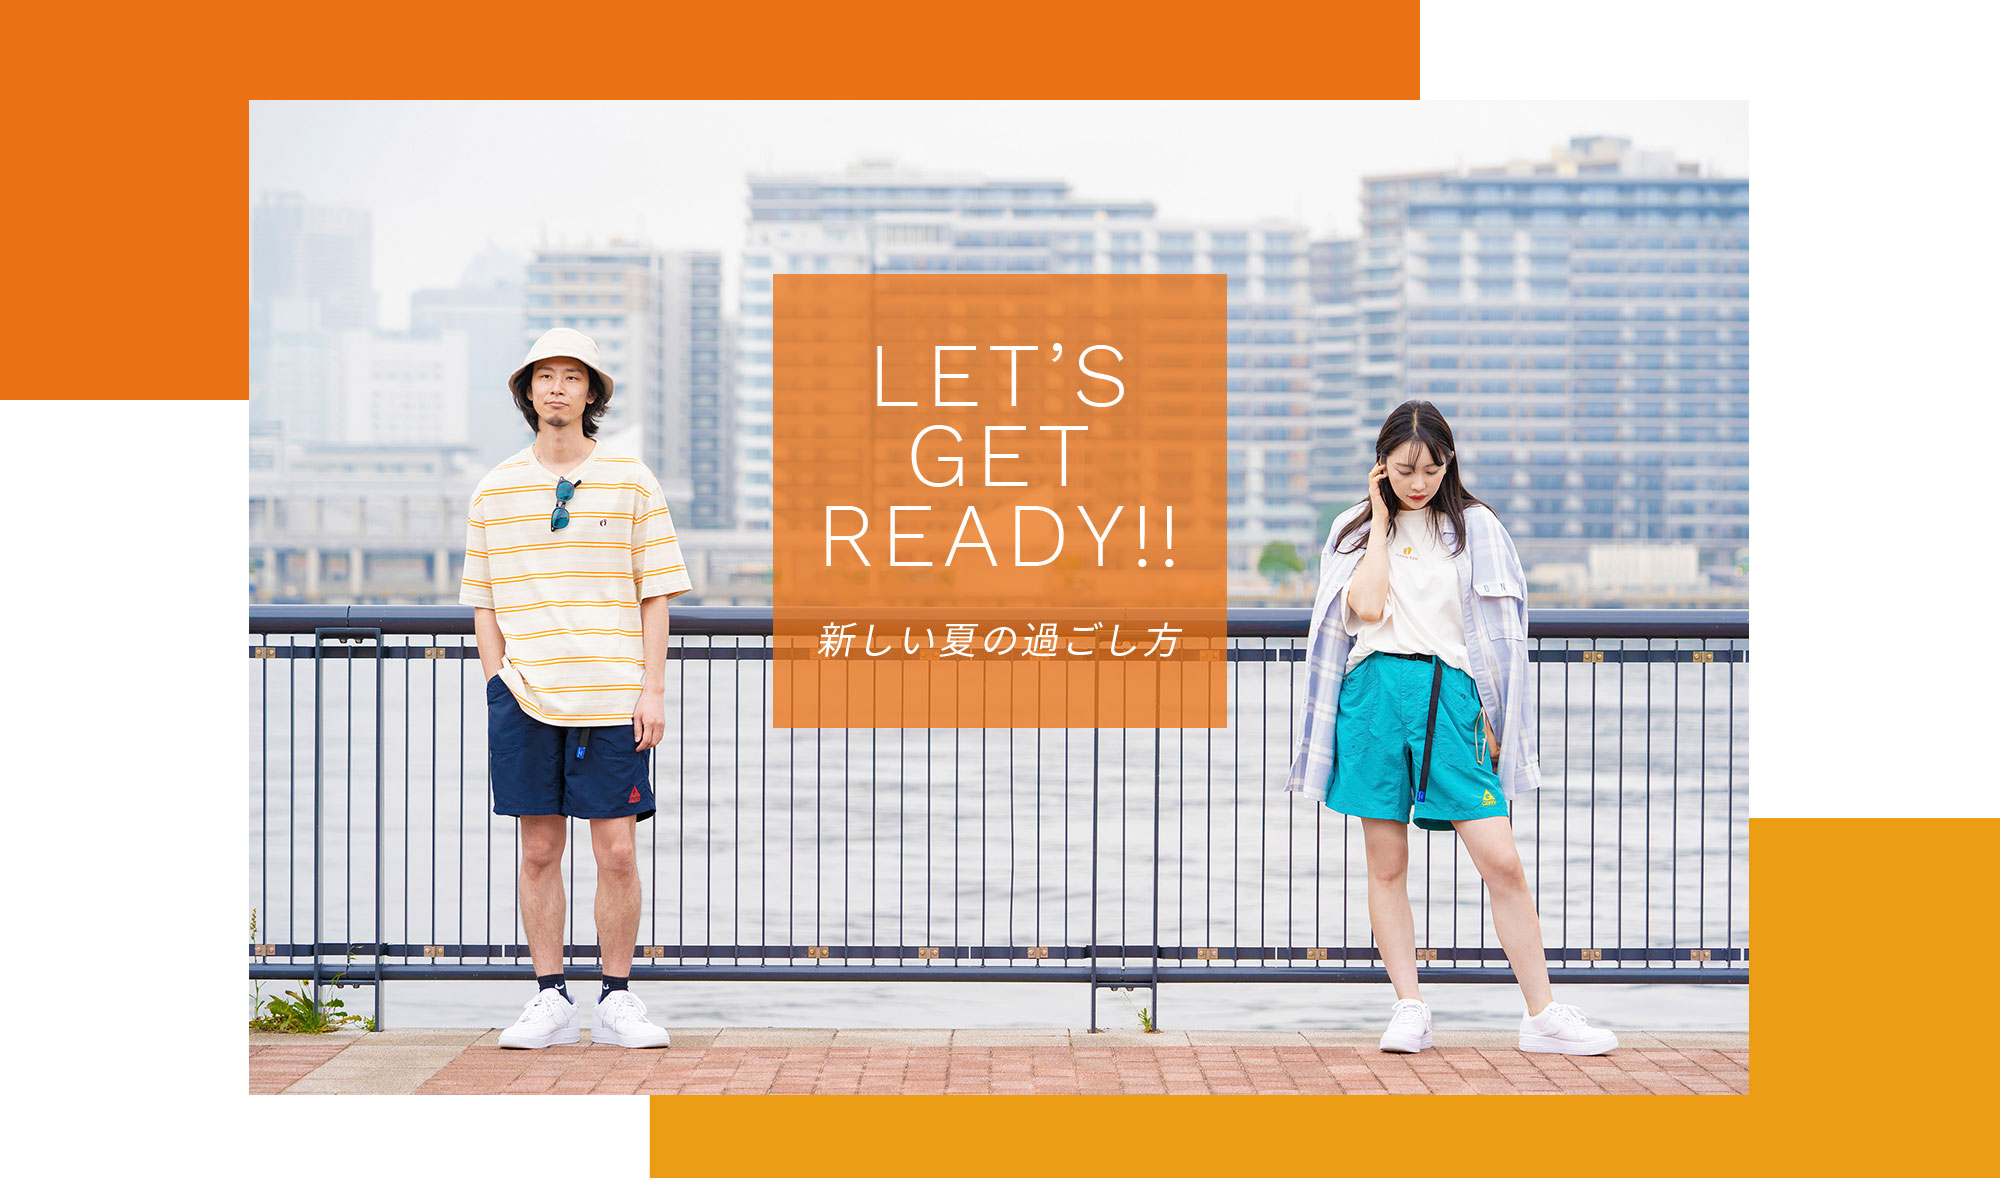 LET'S GET READY! 新しい夏の過ごし方